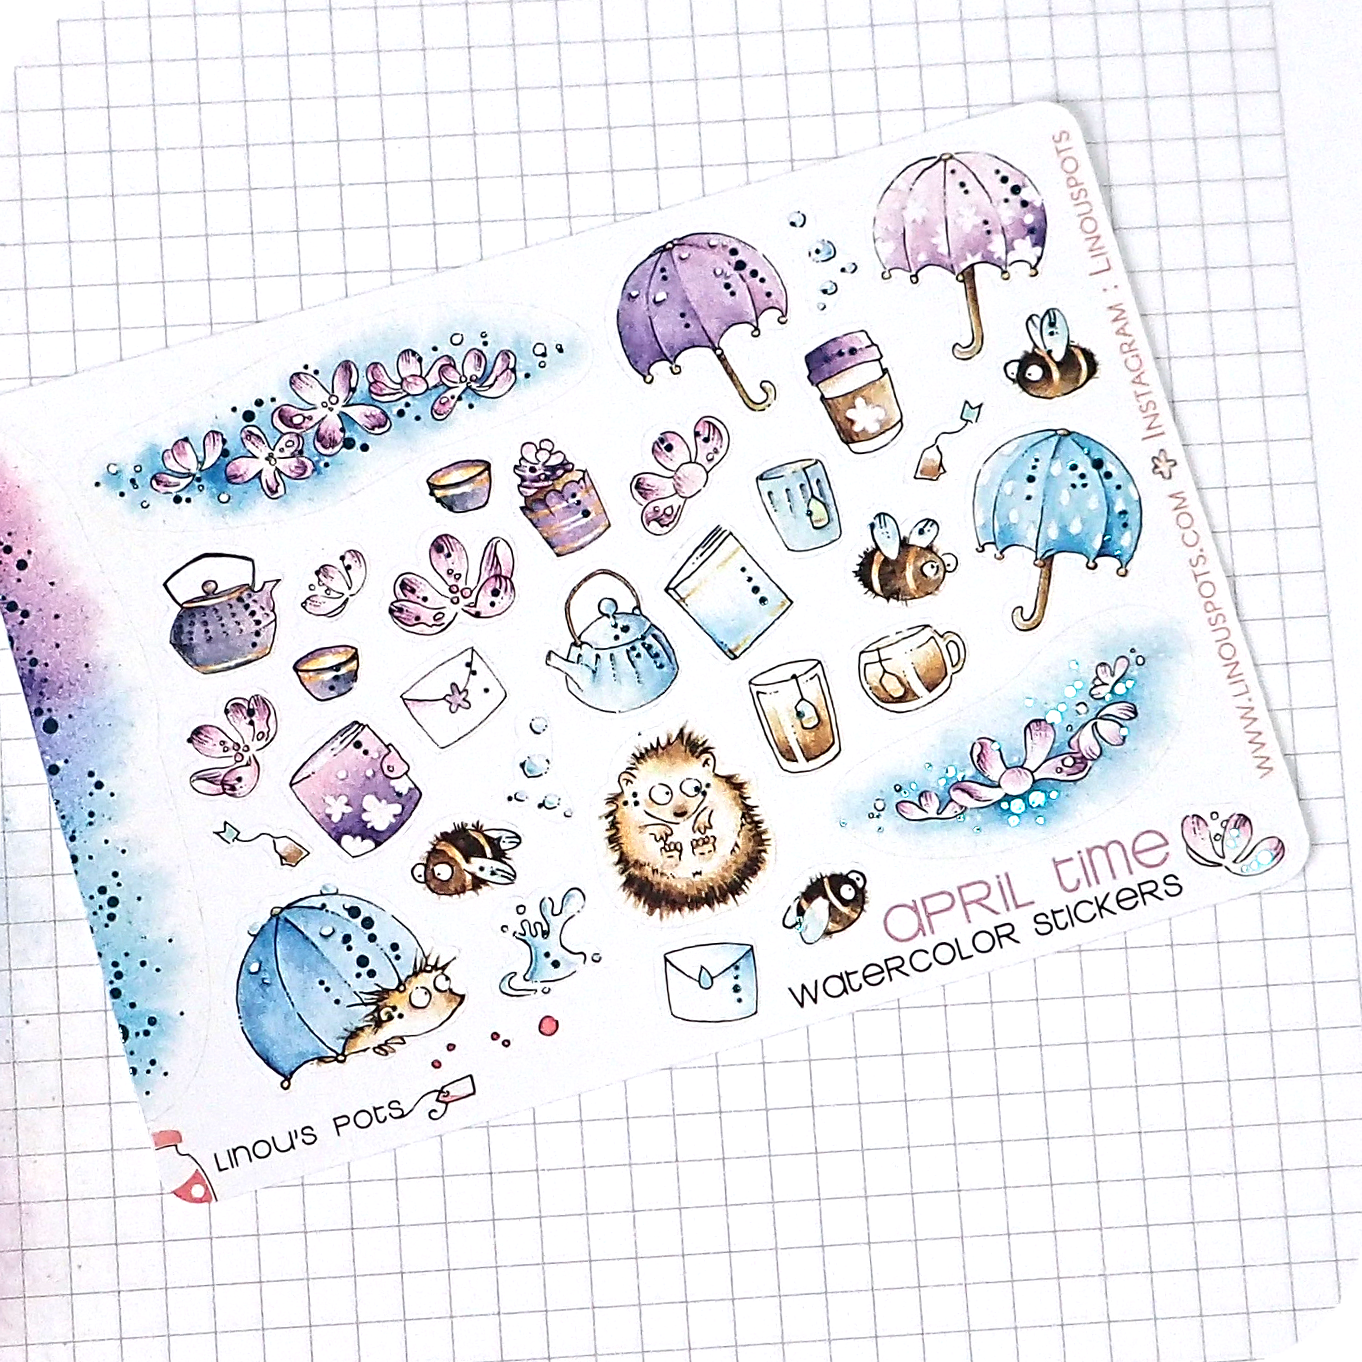 Foiled watercolor planner stickers with hedgehogs, flowers and umbrellas under the rain